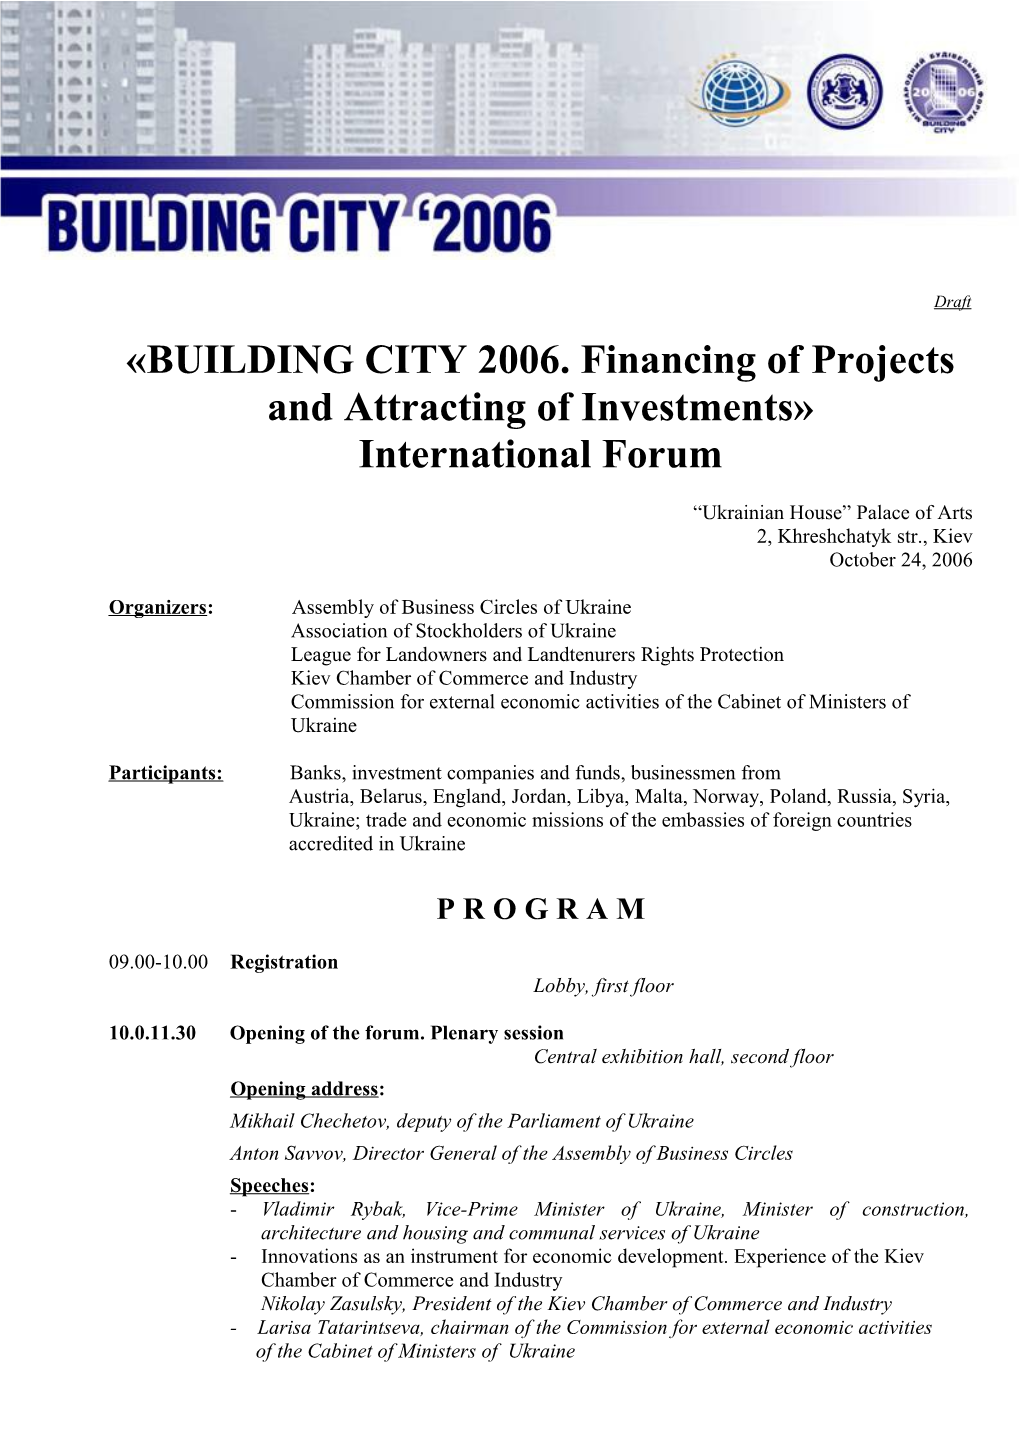 BUILDING CITY 2006. Financing of Projects and Attracting of Investments